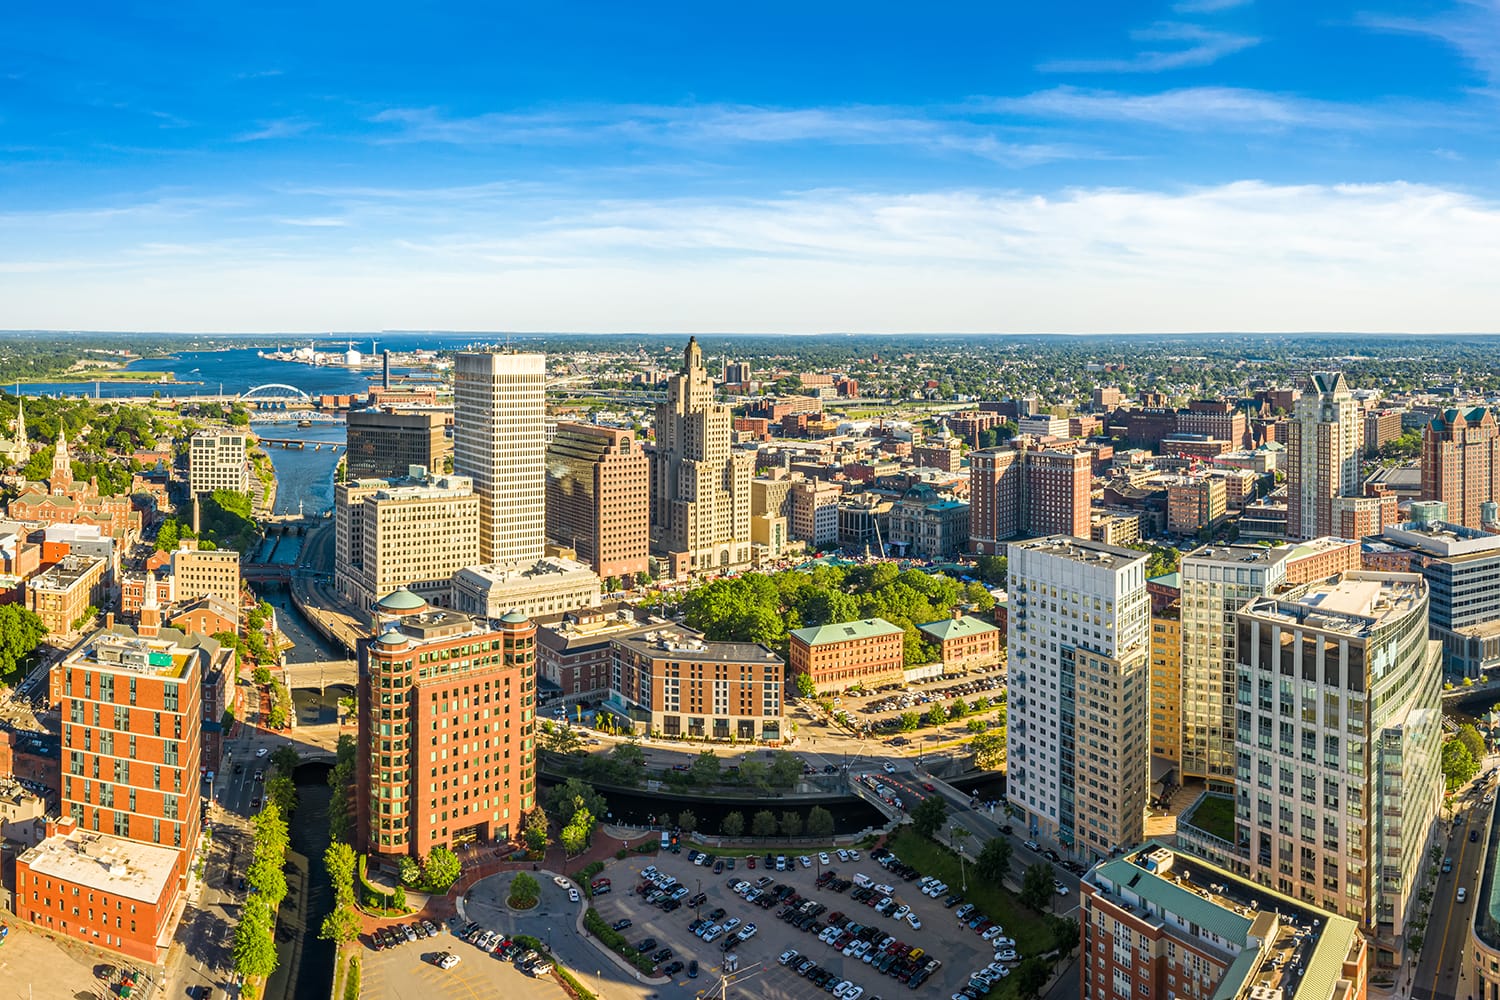 Aerial panorama of Providence skyline on a late afternoon. Providence is the capital city of the U.S. state of Rhode Island. Founded in 1636 is one of the oldest cities in USA.